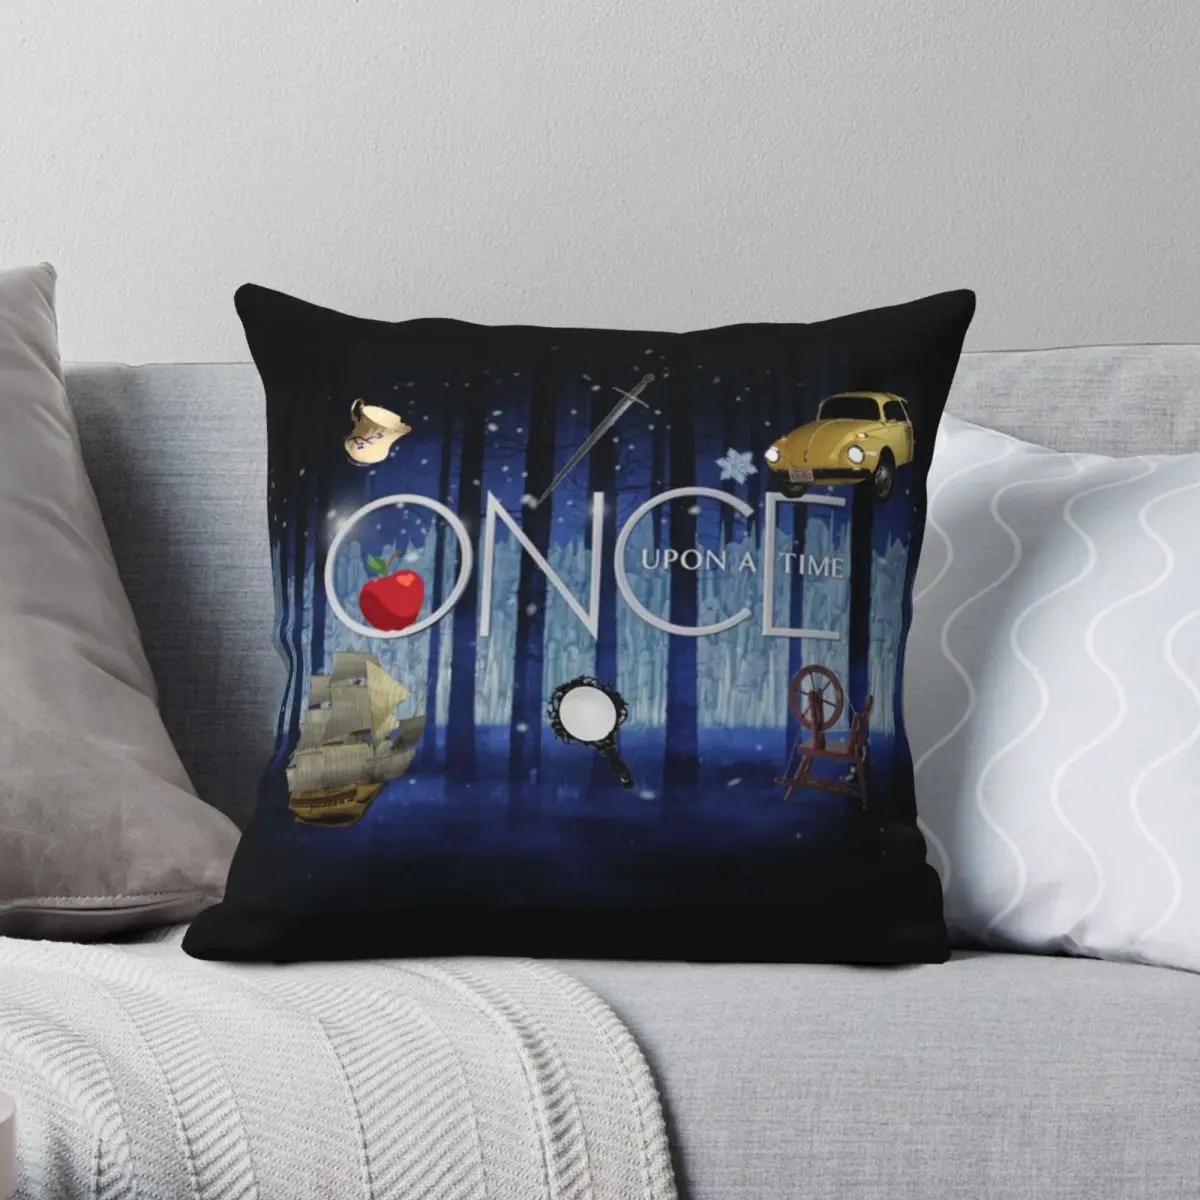 

ONCE UPON A TIME New Pillowcase Polyester Linen Velvet Pattern Zip Decorative Pillow Case Sofa Seater Cushion Cover